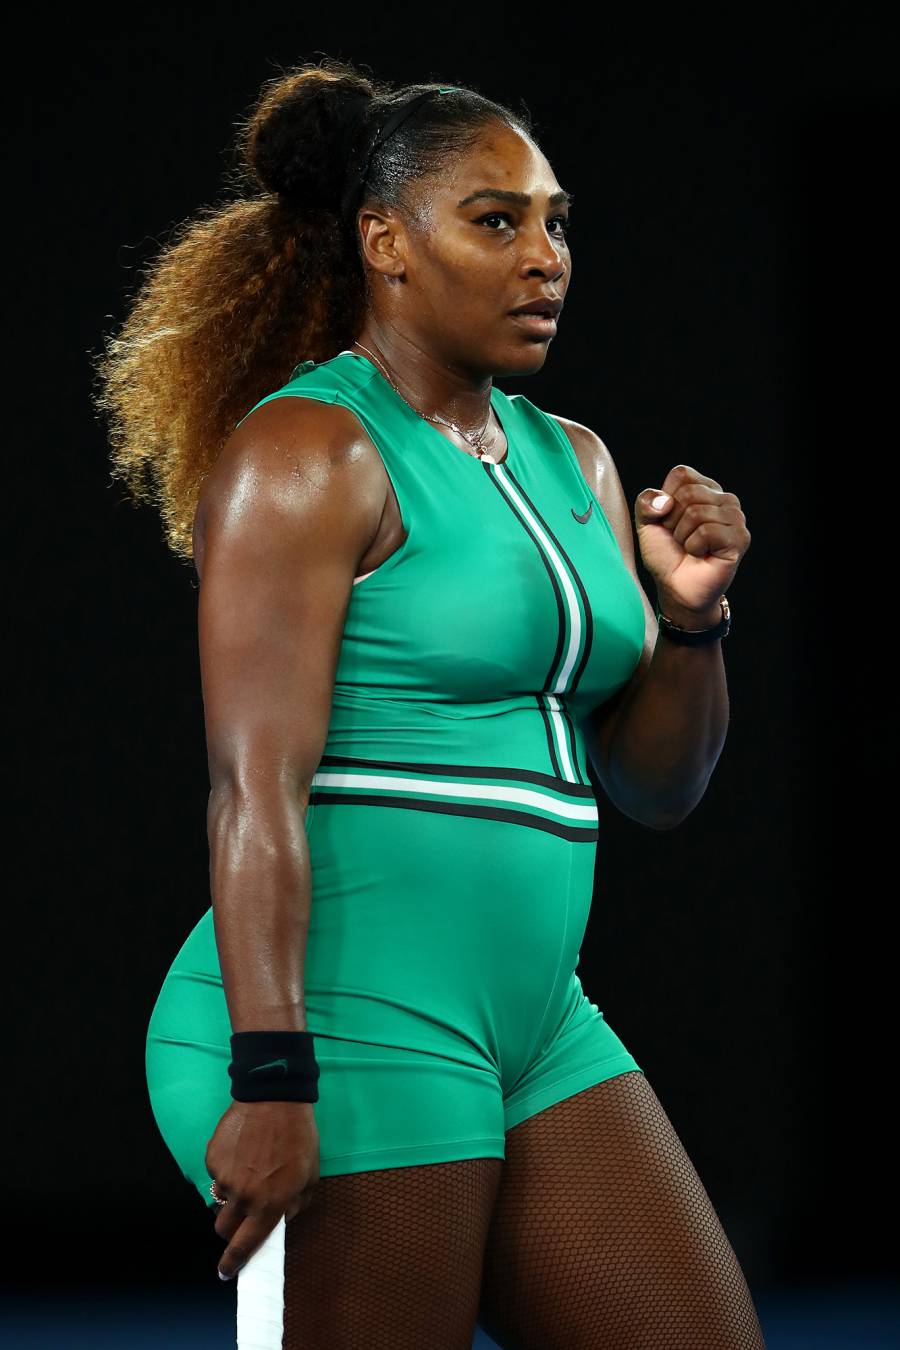 A Complete History of Serena Williams' All-Time Best On-Court Tennis Style